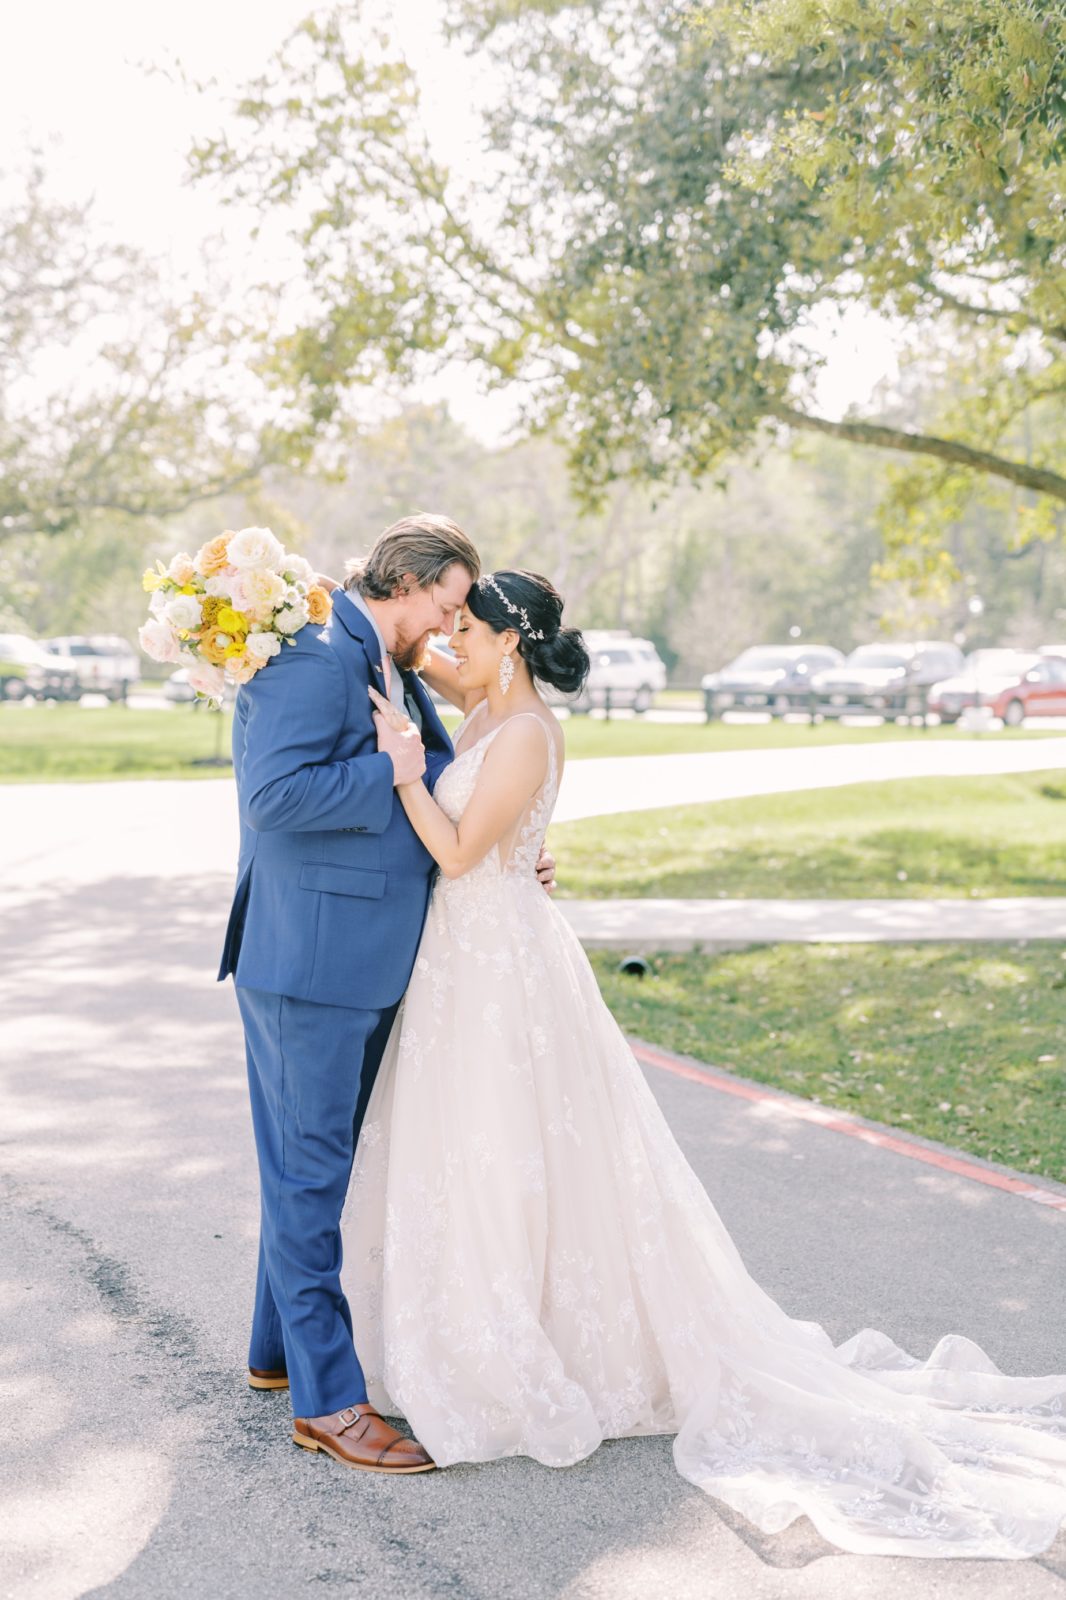 With her wedding train flowing back a bride places her hand on the groom's chest by Christina Elliott Photography. hand on chest #ChristinaElliottPhotography #ChristinaElliottWeddings #Houstonwedding #TheSpringsVenue #EastHoustonweddings #Mrs #Mr